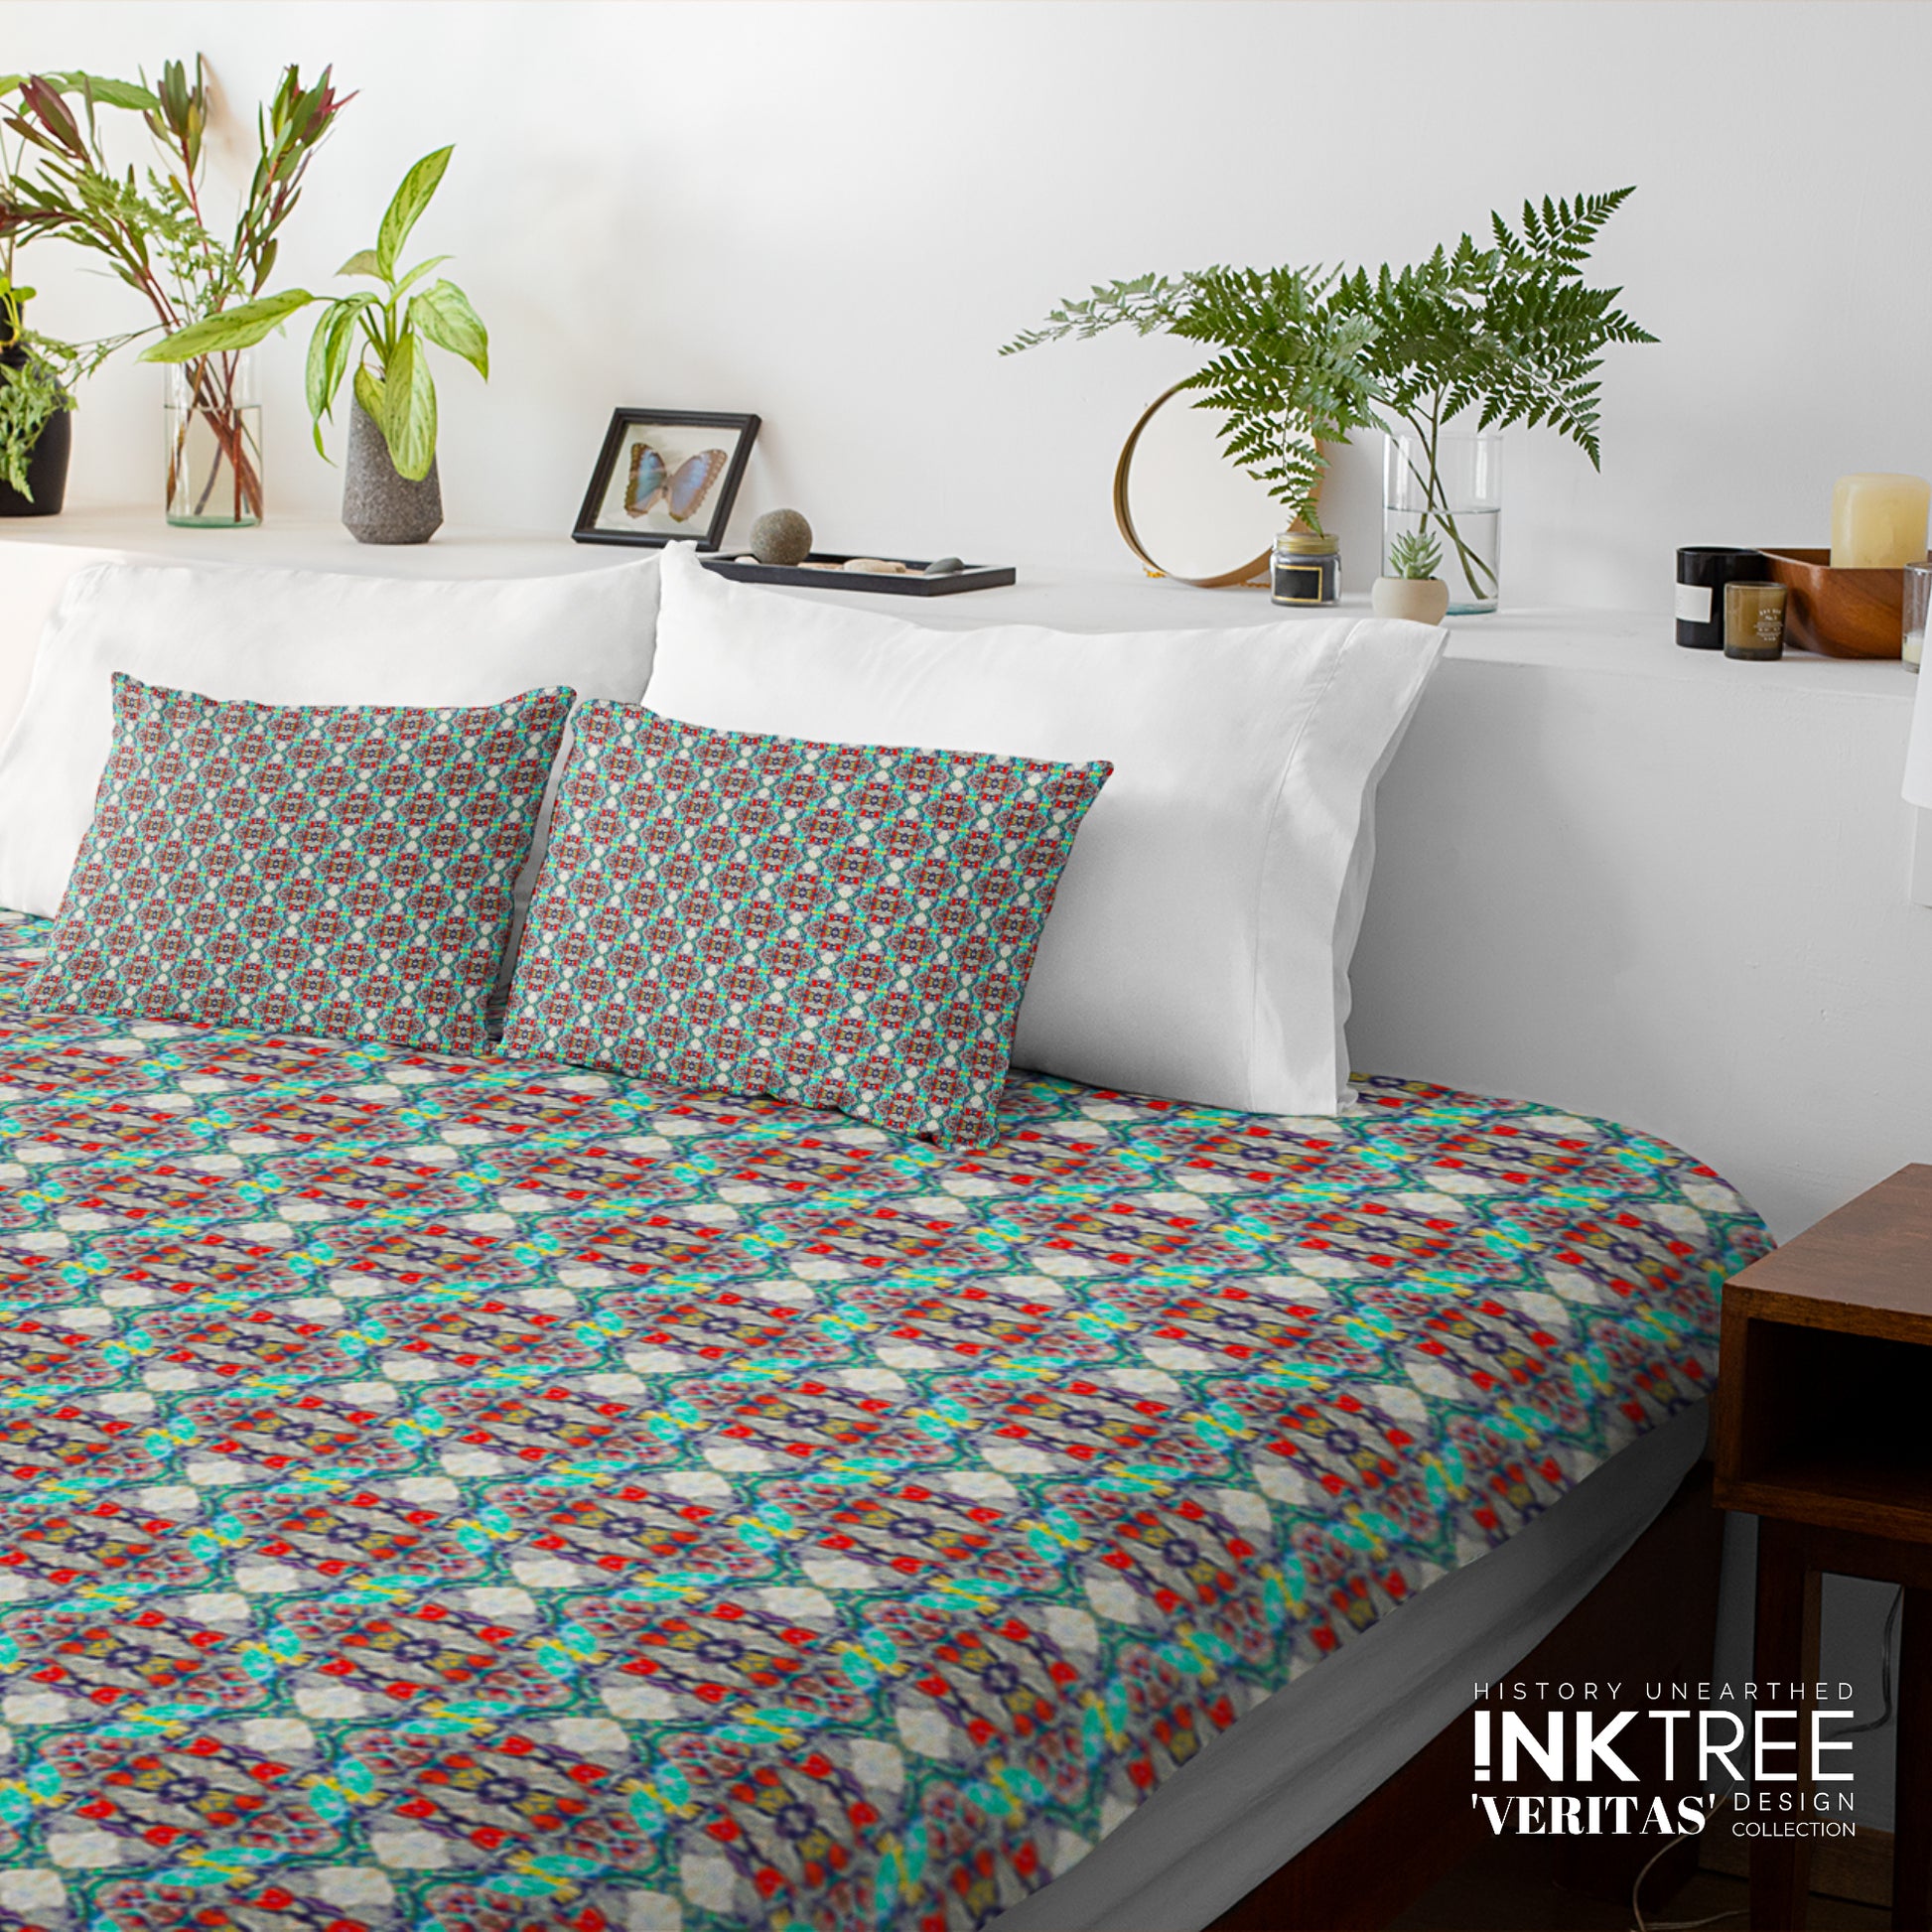 A doona cover and pillows with blue,red and green pattern against a white wall, leaning against white pillows and green plants in vases.